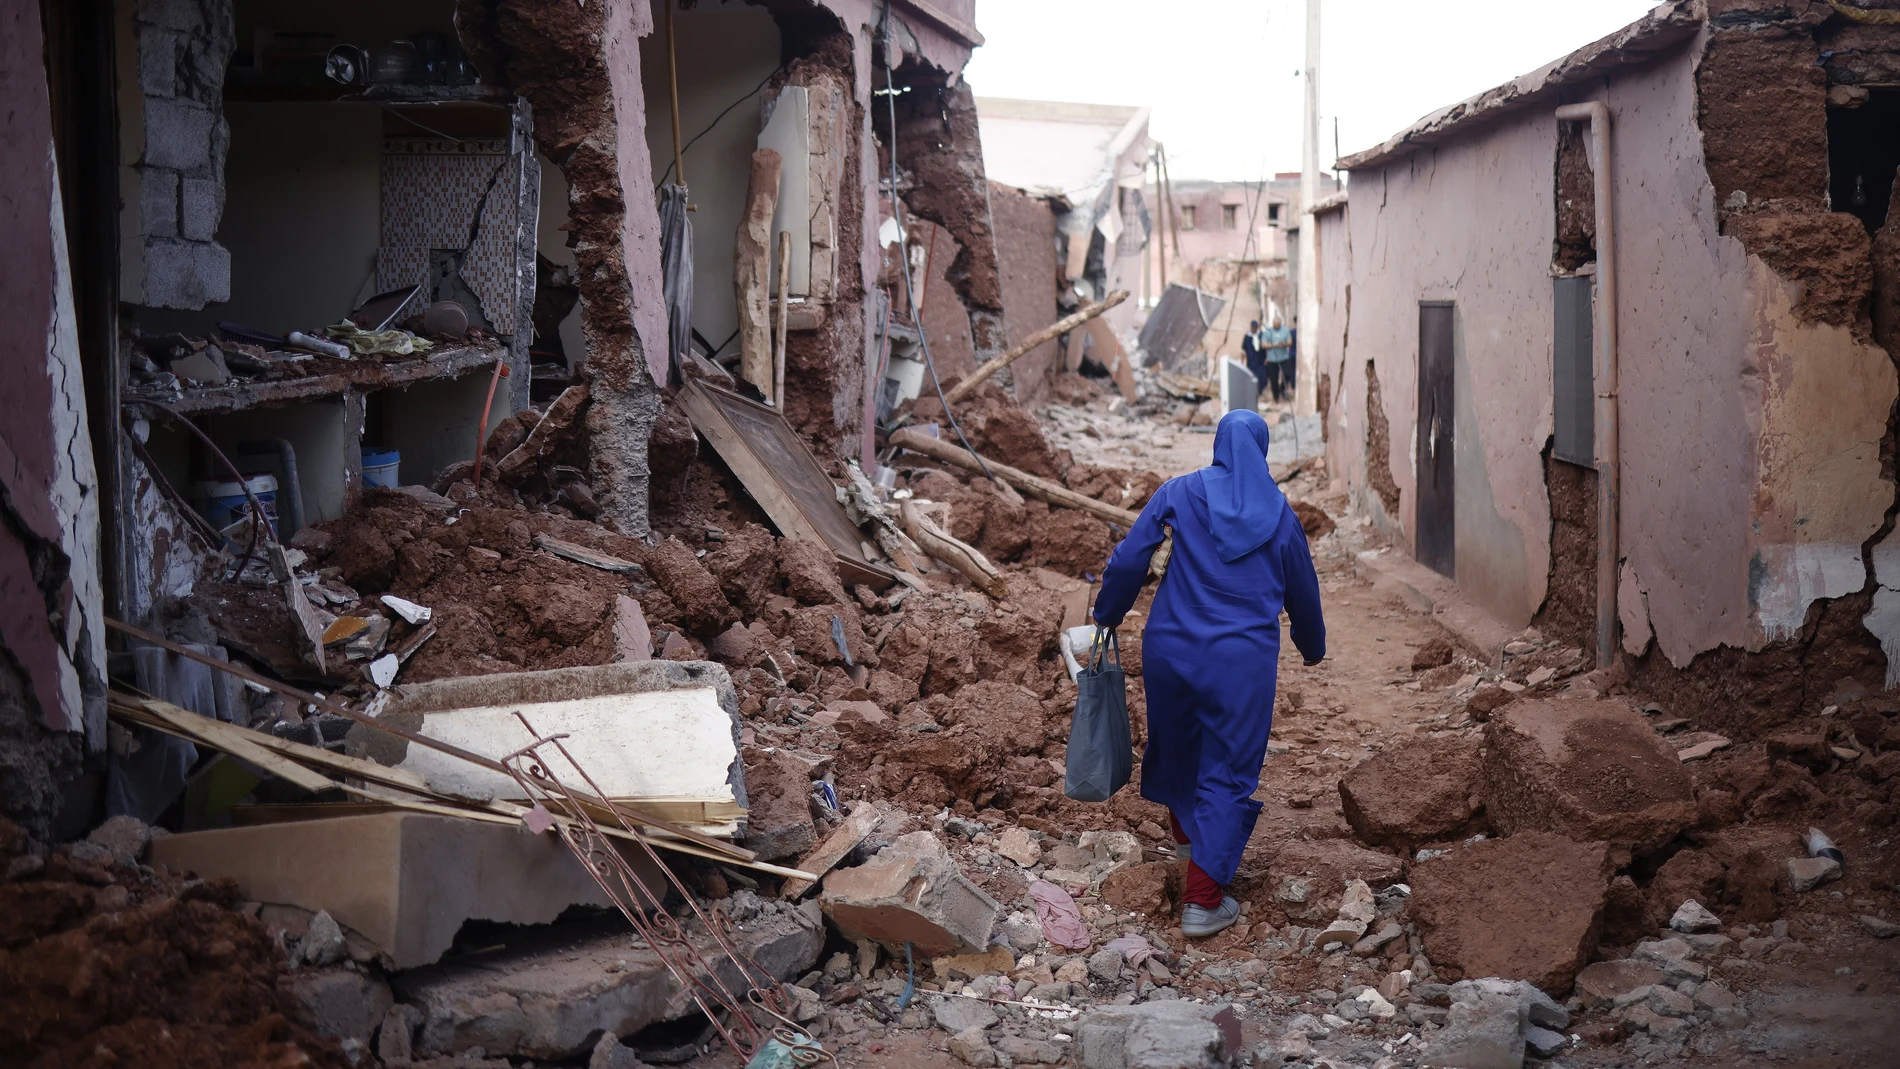 Ouirgane (Morocco), 10/09/2023.- A woman passes by damaged buildings following a powerful earthquake in Ouirgane, south of Marrakesh, Morocco, 10 September 2023. A magnitude 6.8 earthquake that struck central Morocco late 08 September has killed at least 2,012 people and injured 2,059 others, 1,404 of whom are in serious condition, damaging buildings from villages and towns in the Atlas Mountains to Marrakesh, according to a report released by the country's Interior Ministry. The earthquake has affected more than 300,000 people in Marrakesh and its outskirts, the UN Office for the Coordination of Humanitarian Affairs (OCHA) said. (Terremoto/sismo, Marruecos) EFE/EPA/YOAN VALAT